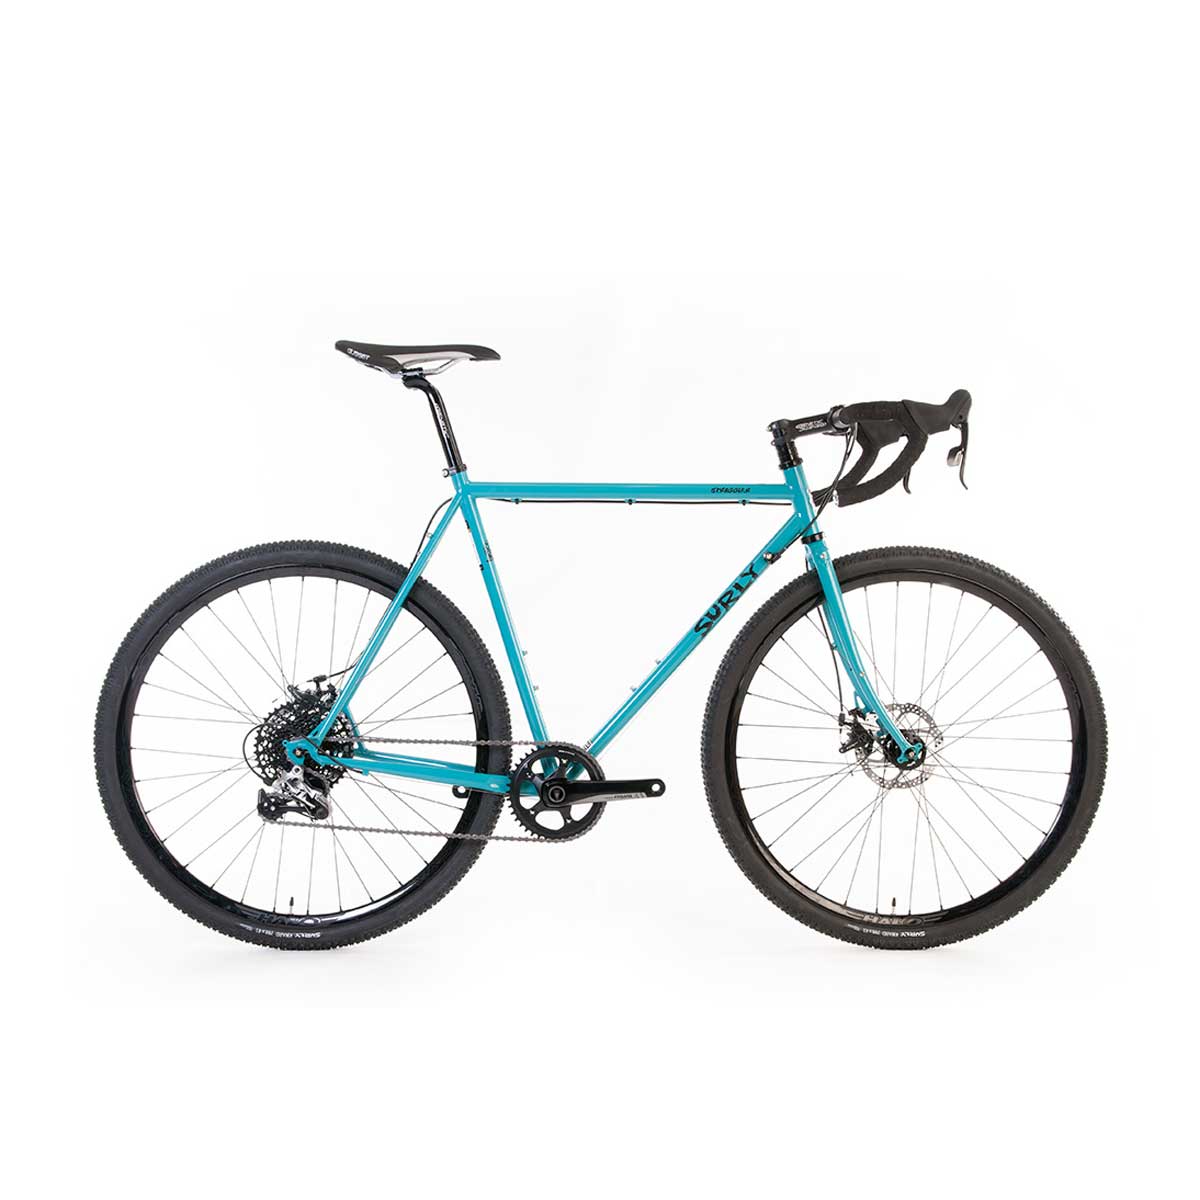 Surly Straggler - Rival 1x